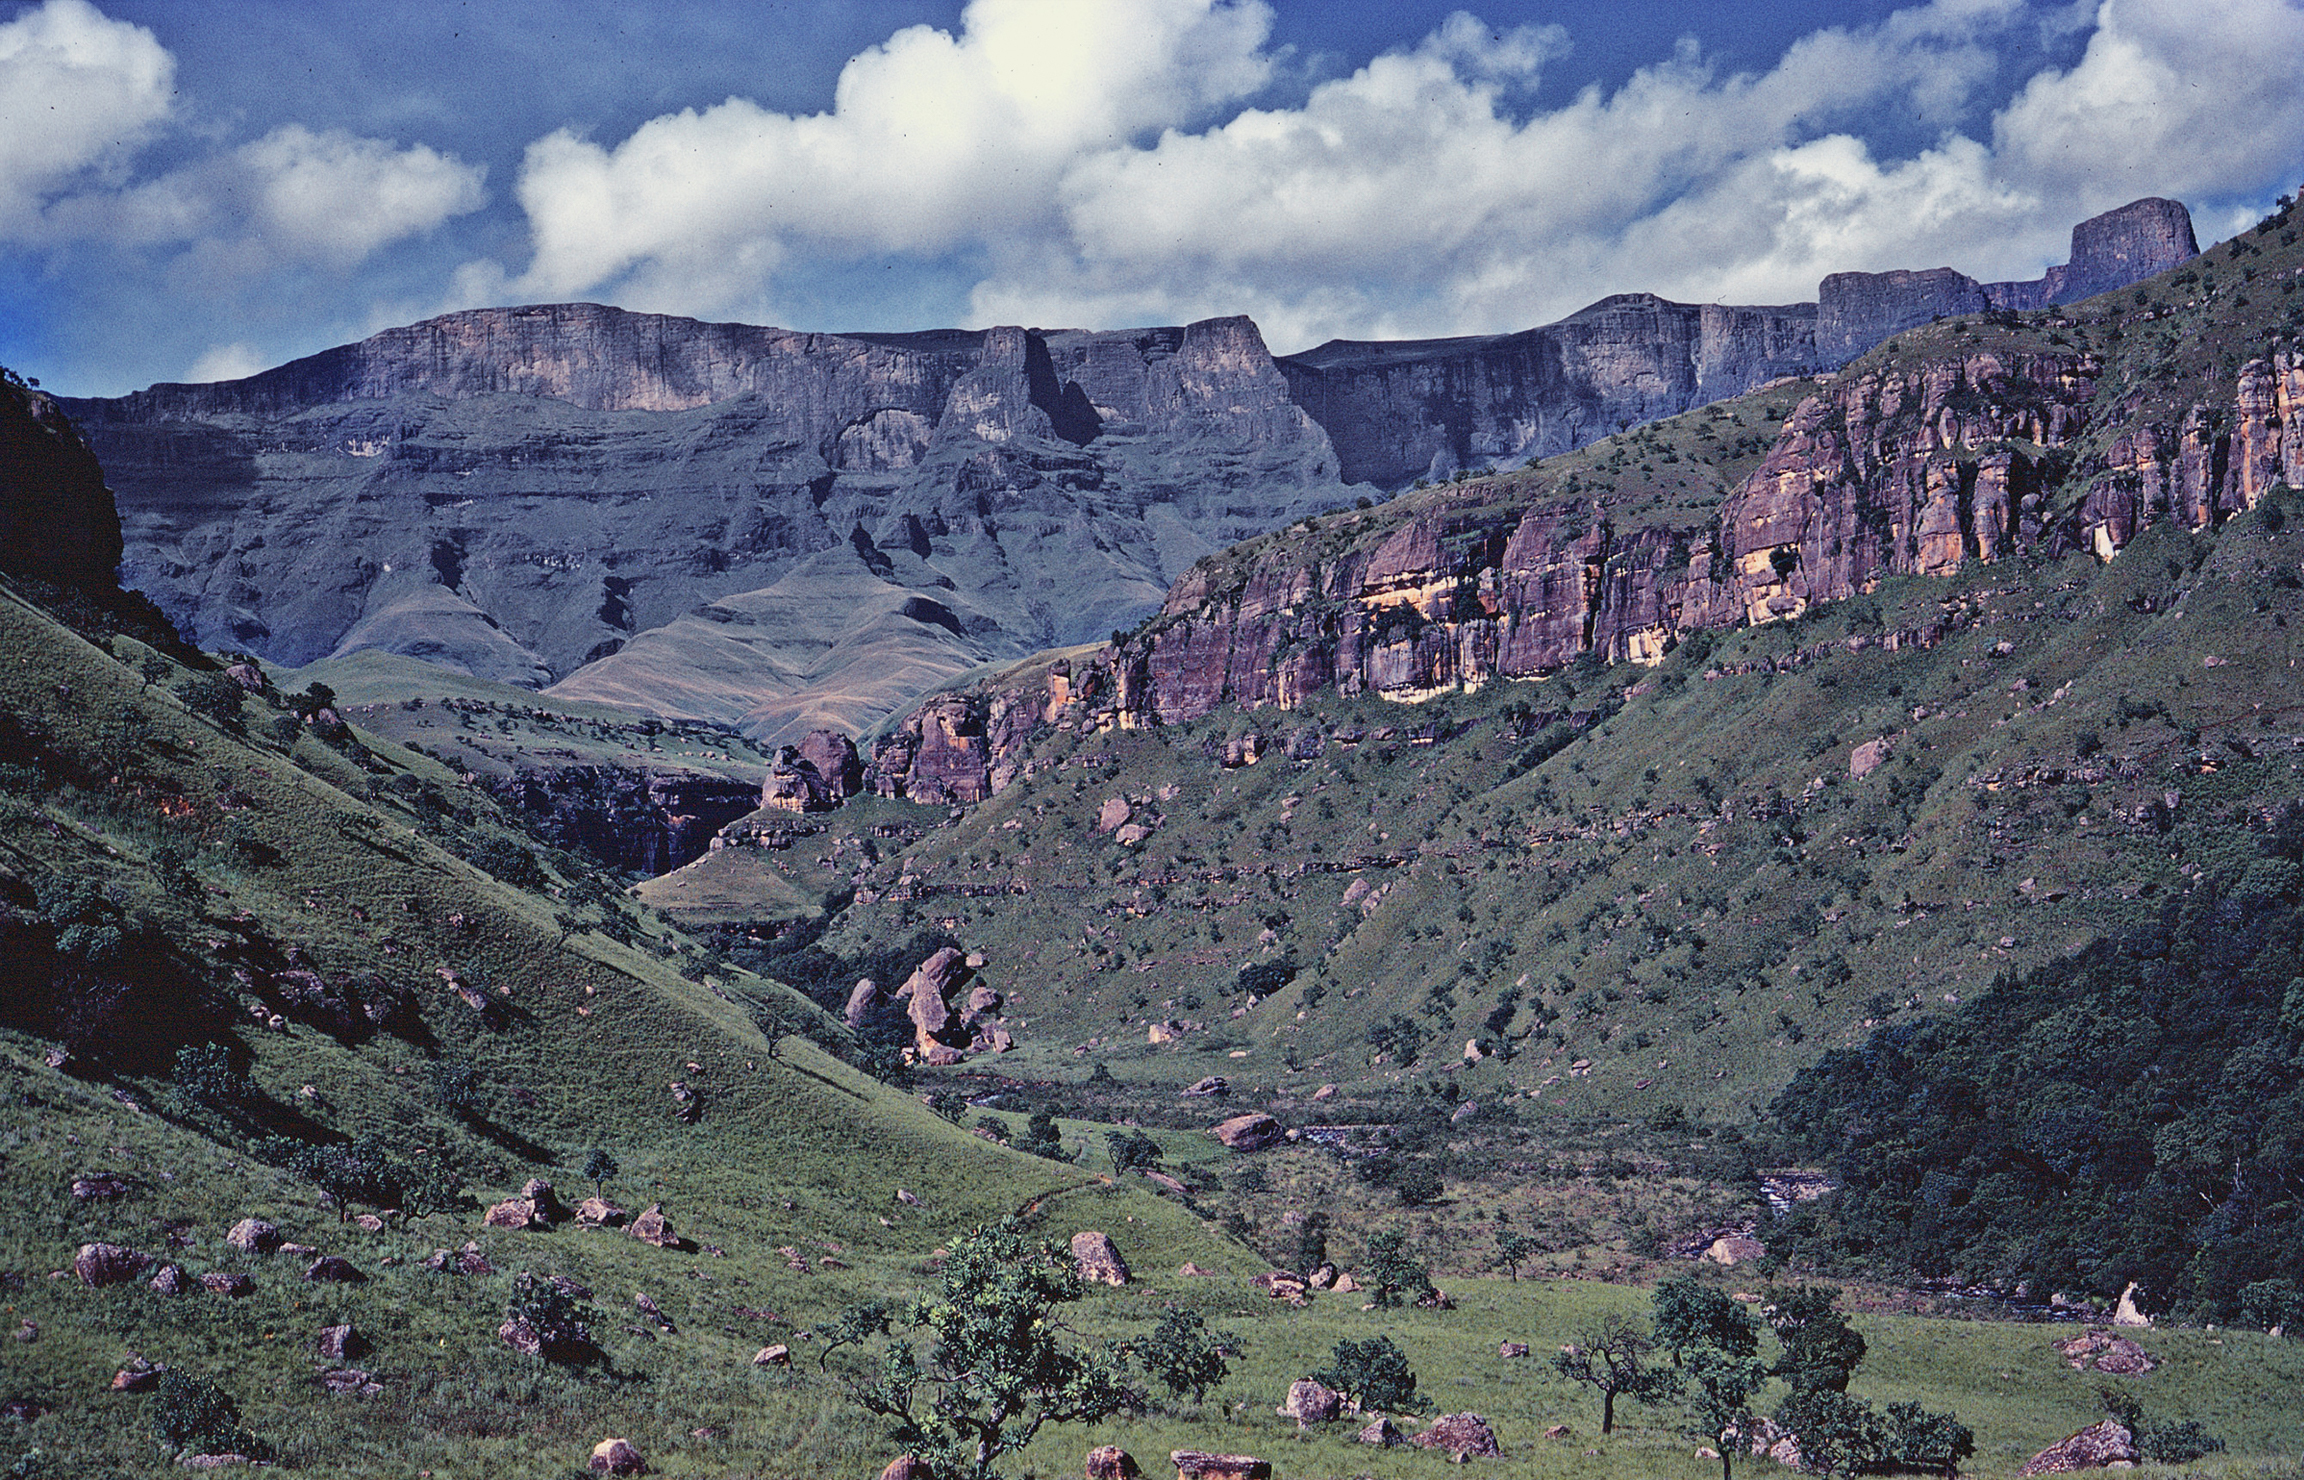 View up the Injasuthi River and the high uKhahlamba-Drakensberg Mountains from Copulation Rock, February 1980